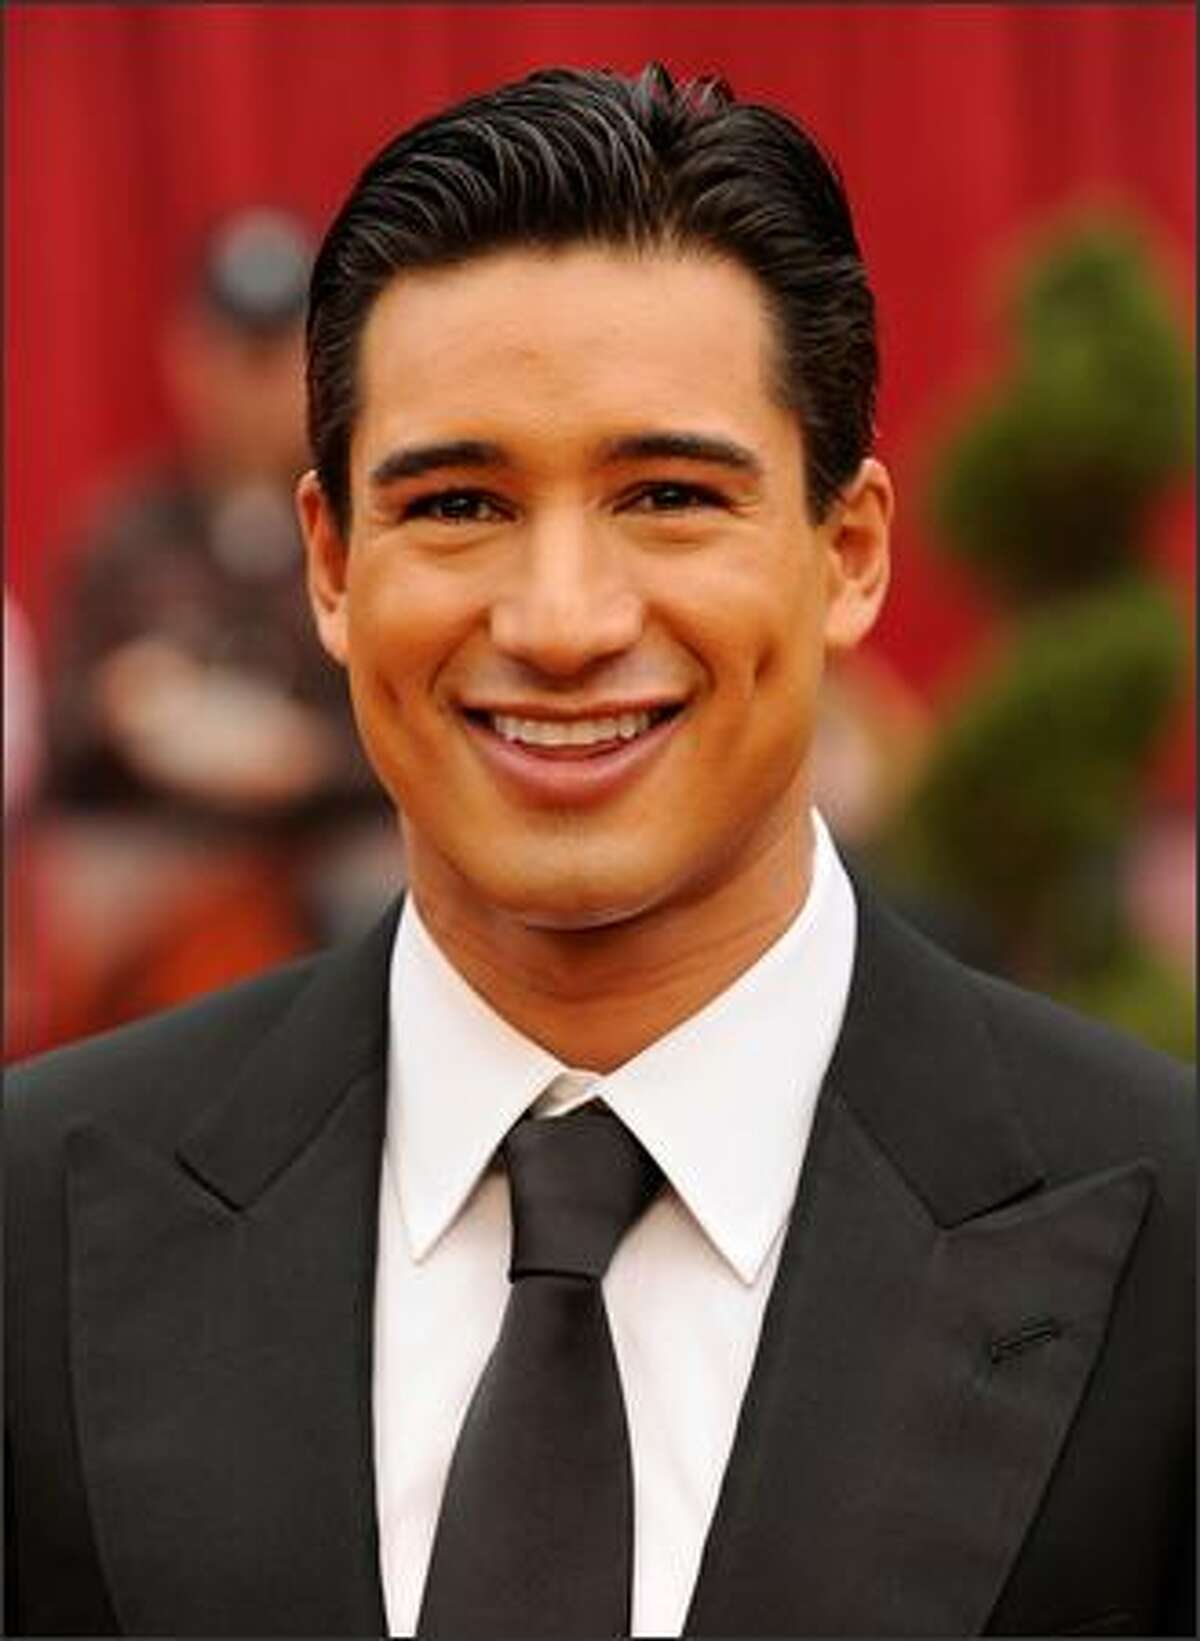 TV personality Mario Lopez arrives at the 81st Annual Academy Awards held at Kodak Theatre in Los Angeles, California.